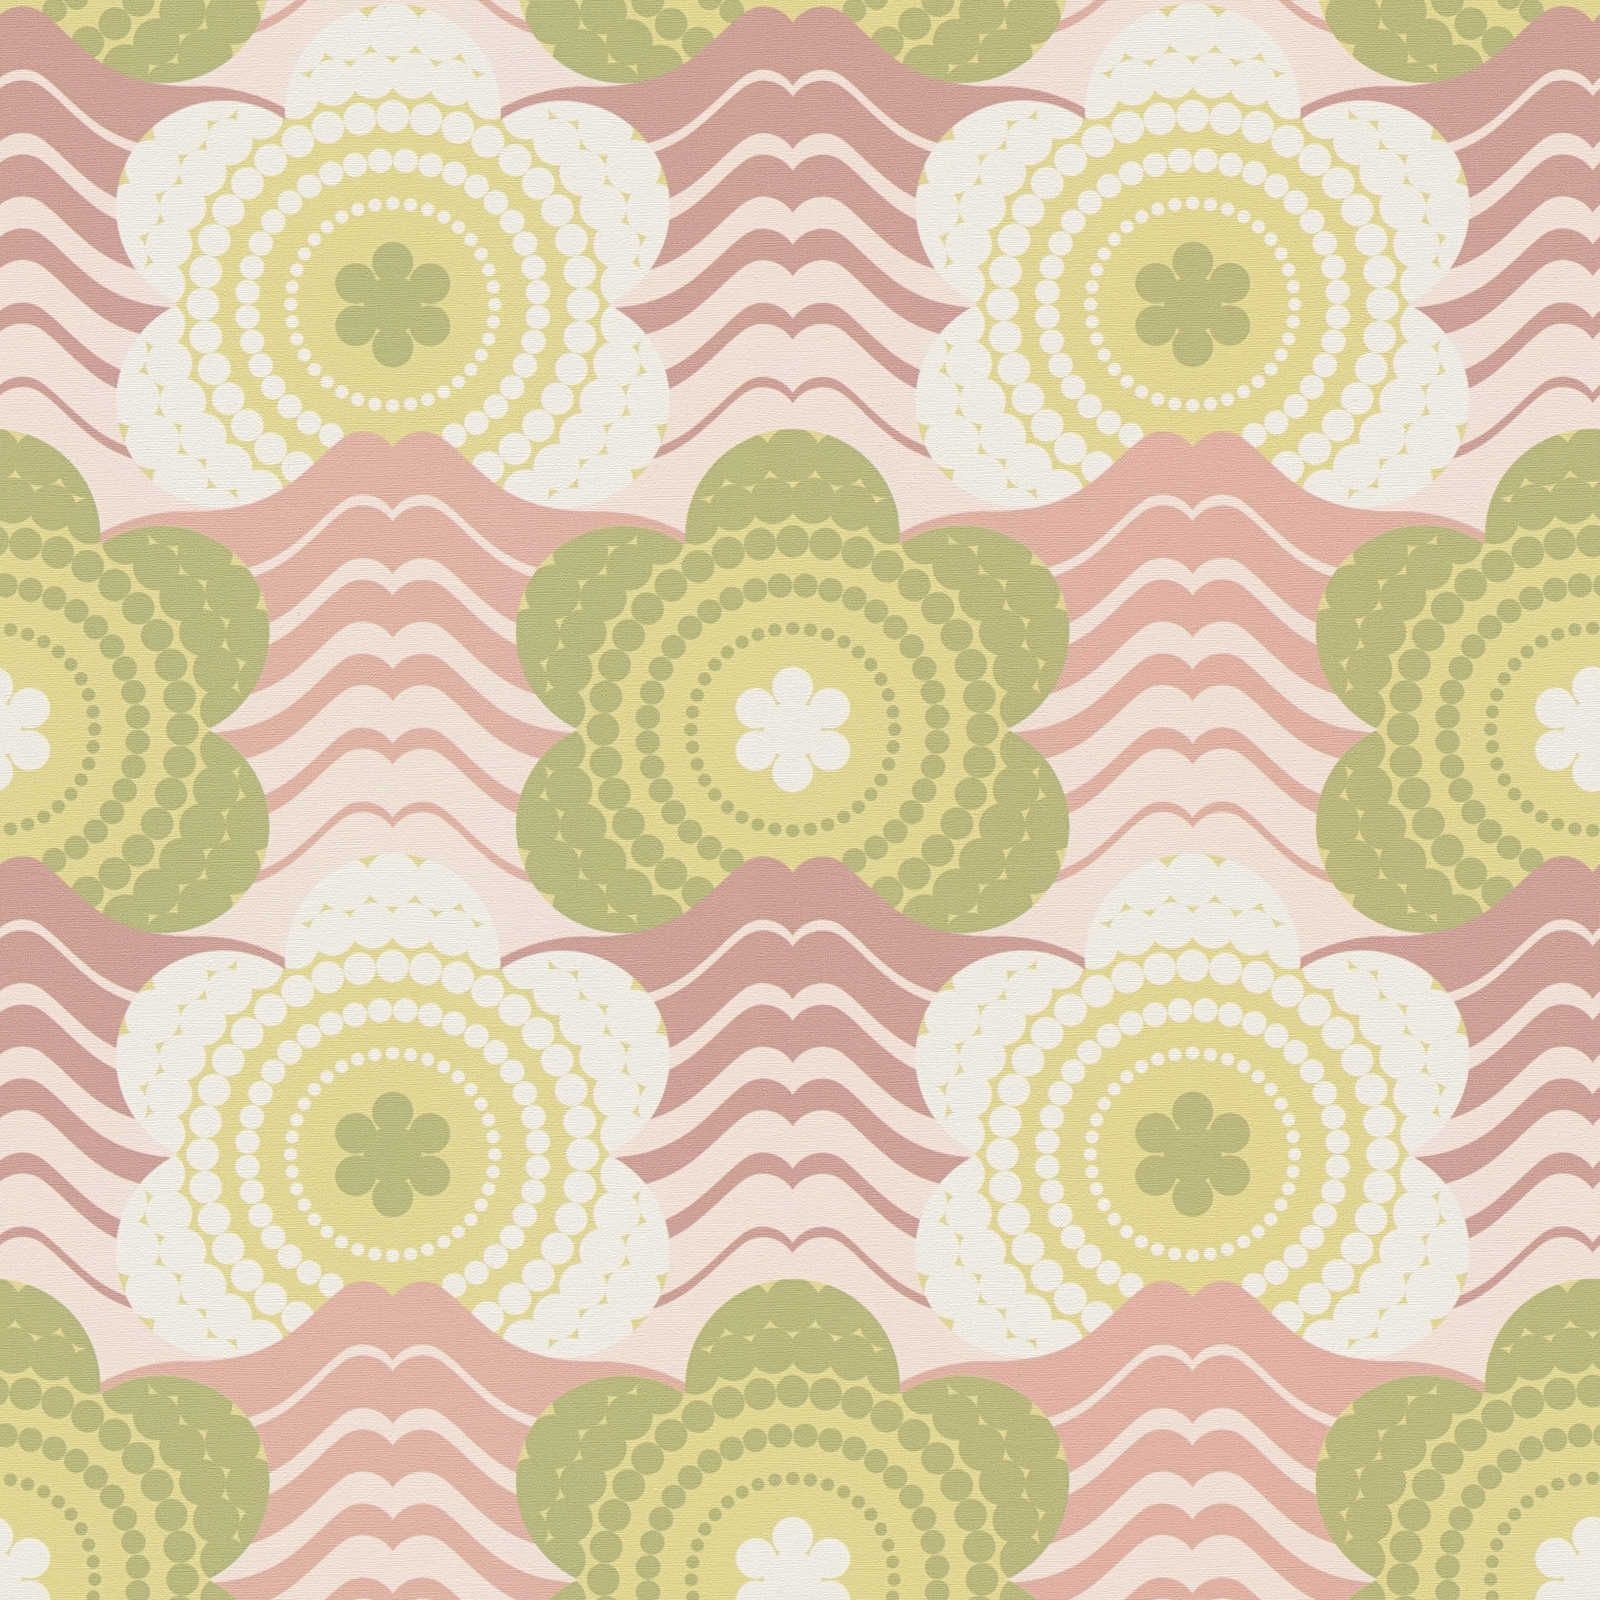             Retro style waves and flowers pattern on lightly textured wallpaper - pink, green, cream
        